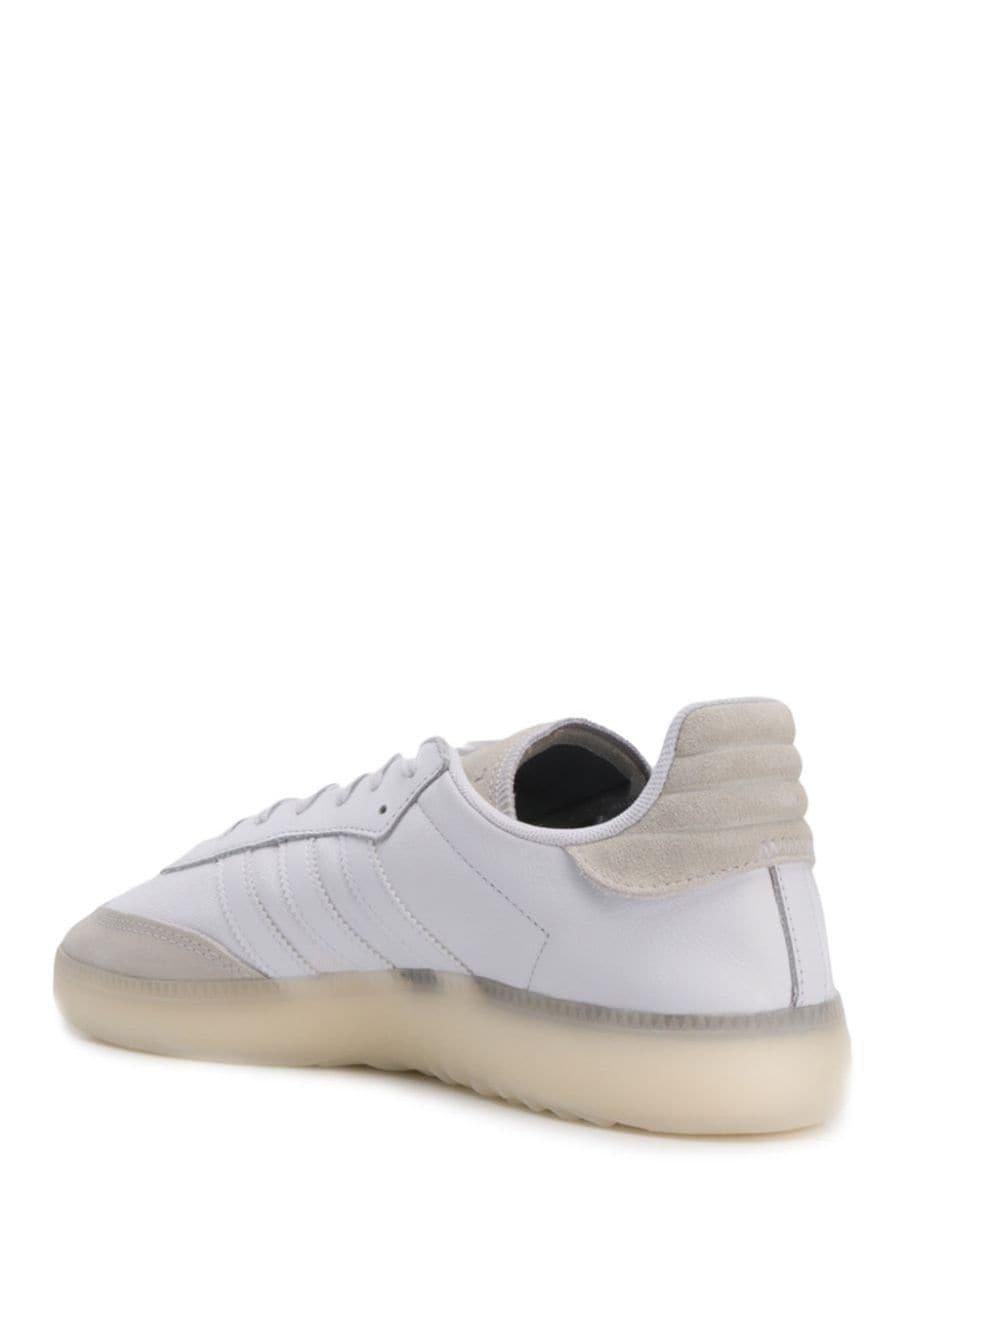 adidas S4m3a Sneakers in White for Men | Lyst